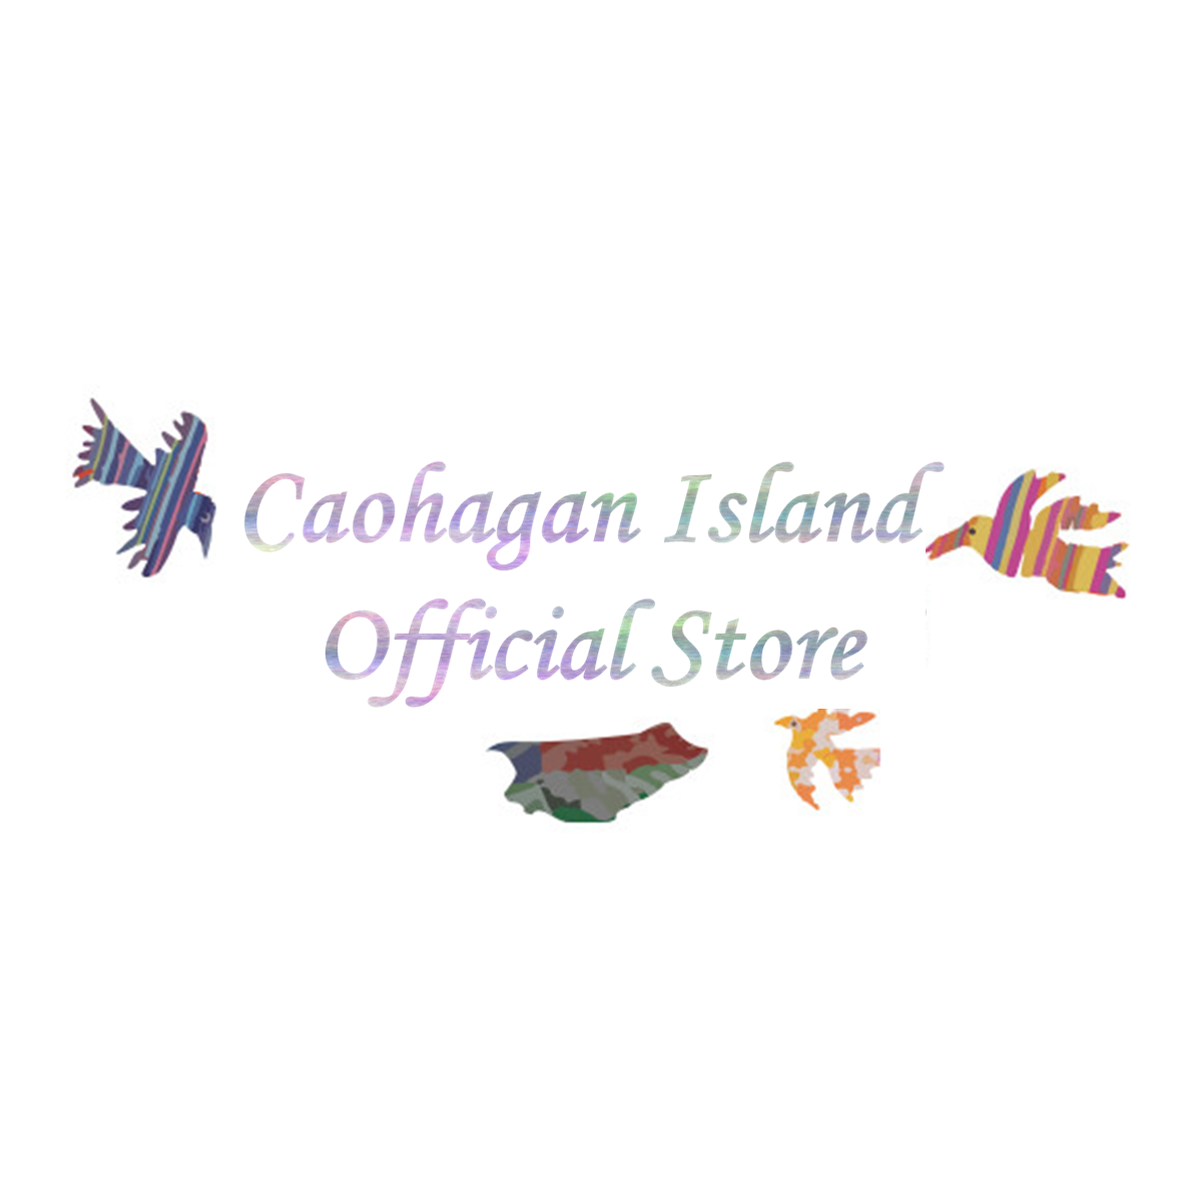 Caohagan Island Official Store